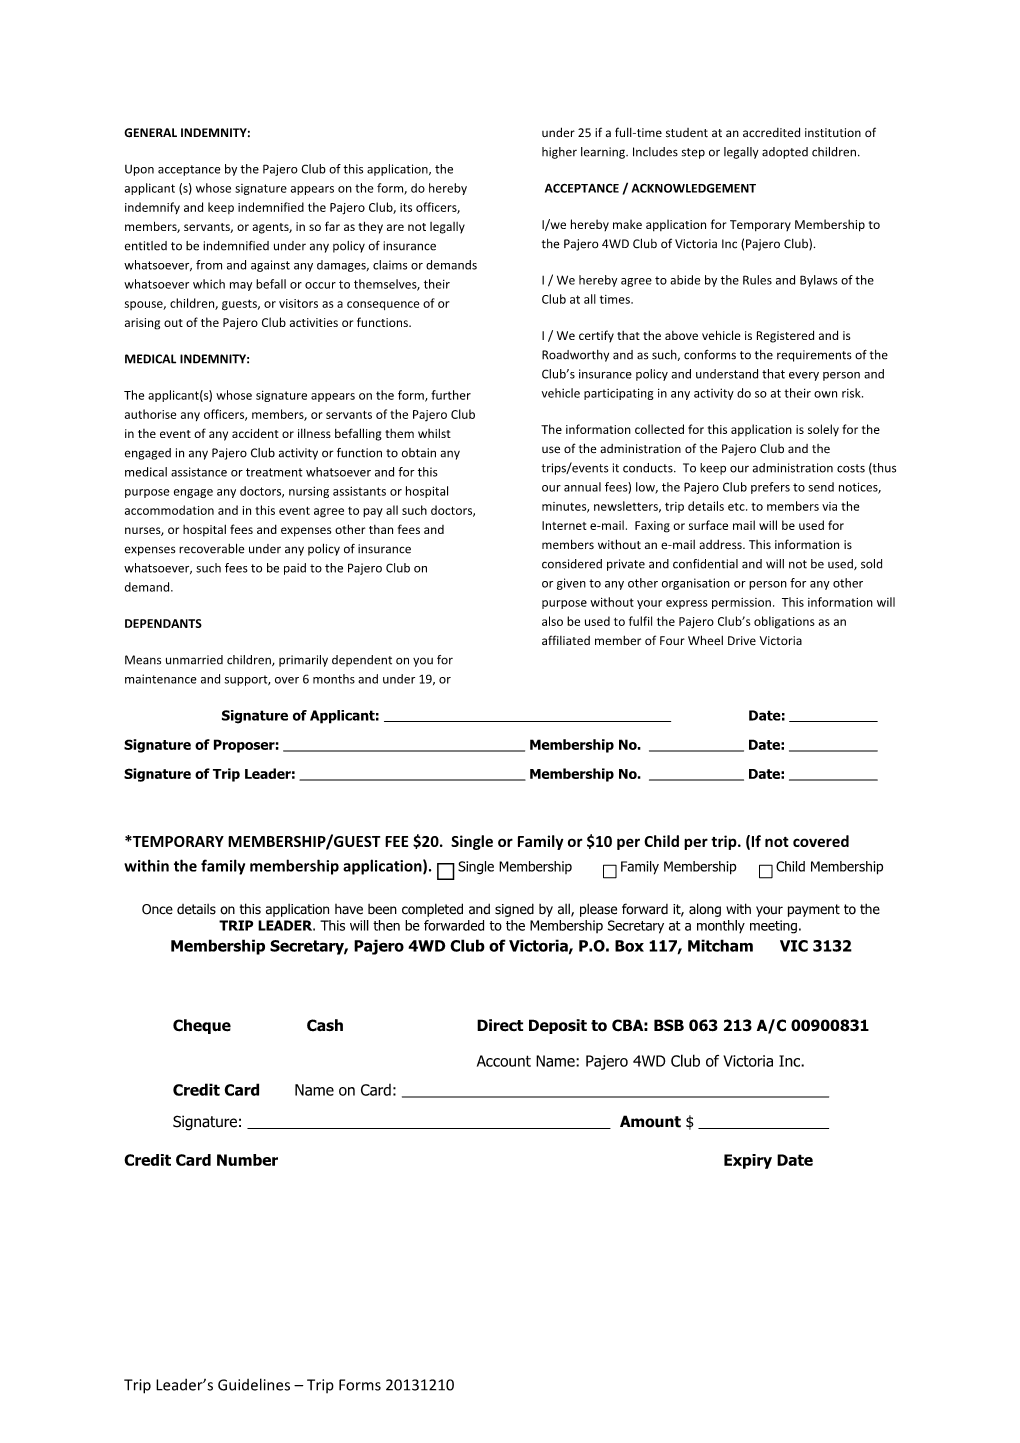 This Form Should Be Completed for All Club Trips When a *Temporary Member/Guest Is Attending